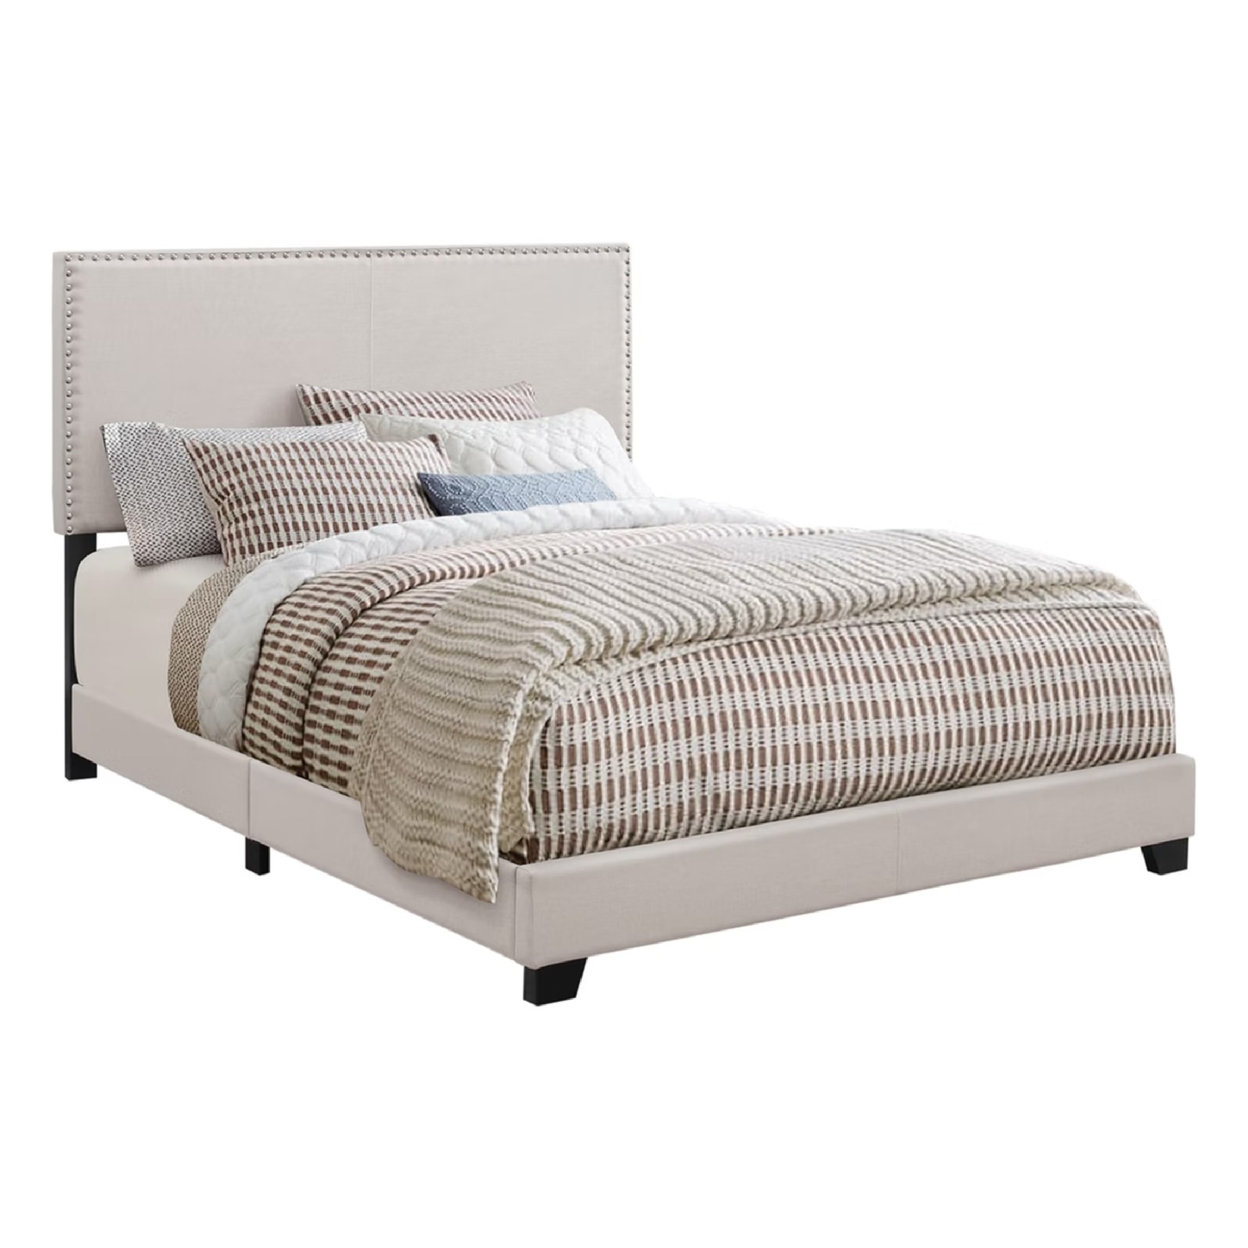 Fabric Upholstered Queen Size Platform Bed With Nail Head Trim, Ivory- Saltoro Sherpi